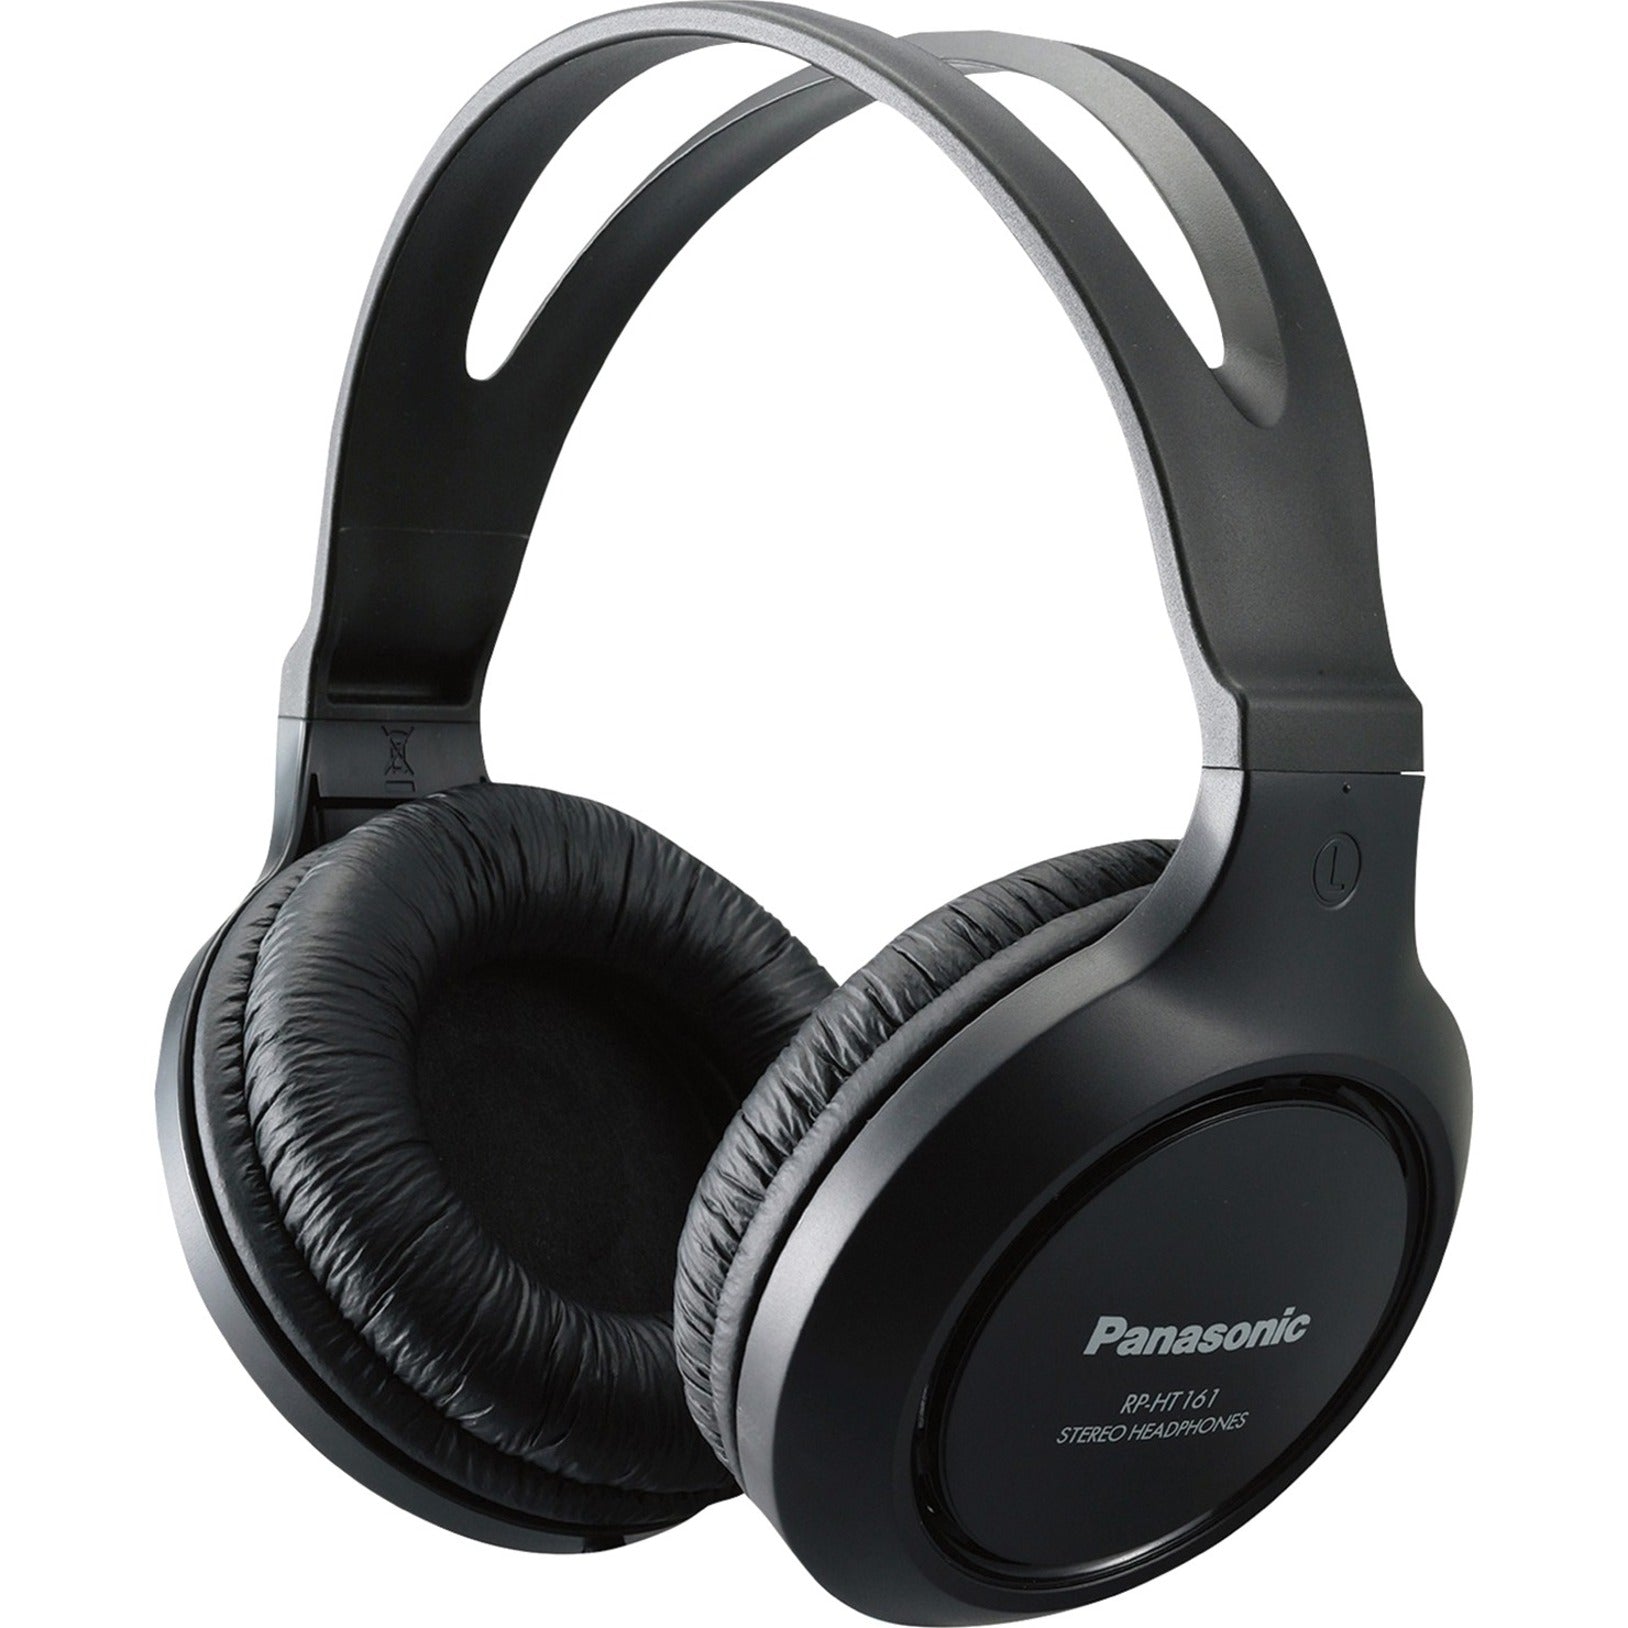 Panasonic RP-HT161-K Headphone, Over-the-head Wired Headphone with 6.50 ft Cable Length, Matte Black